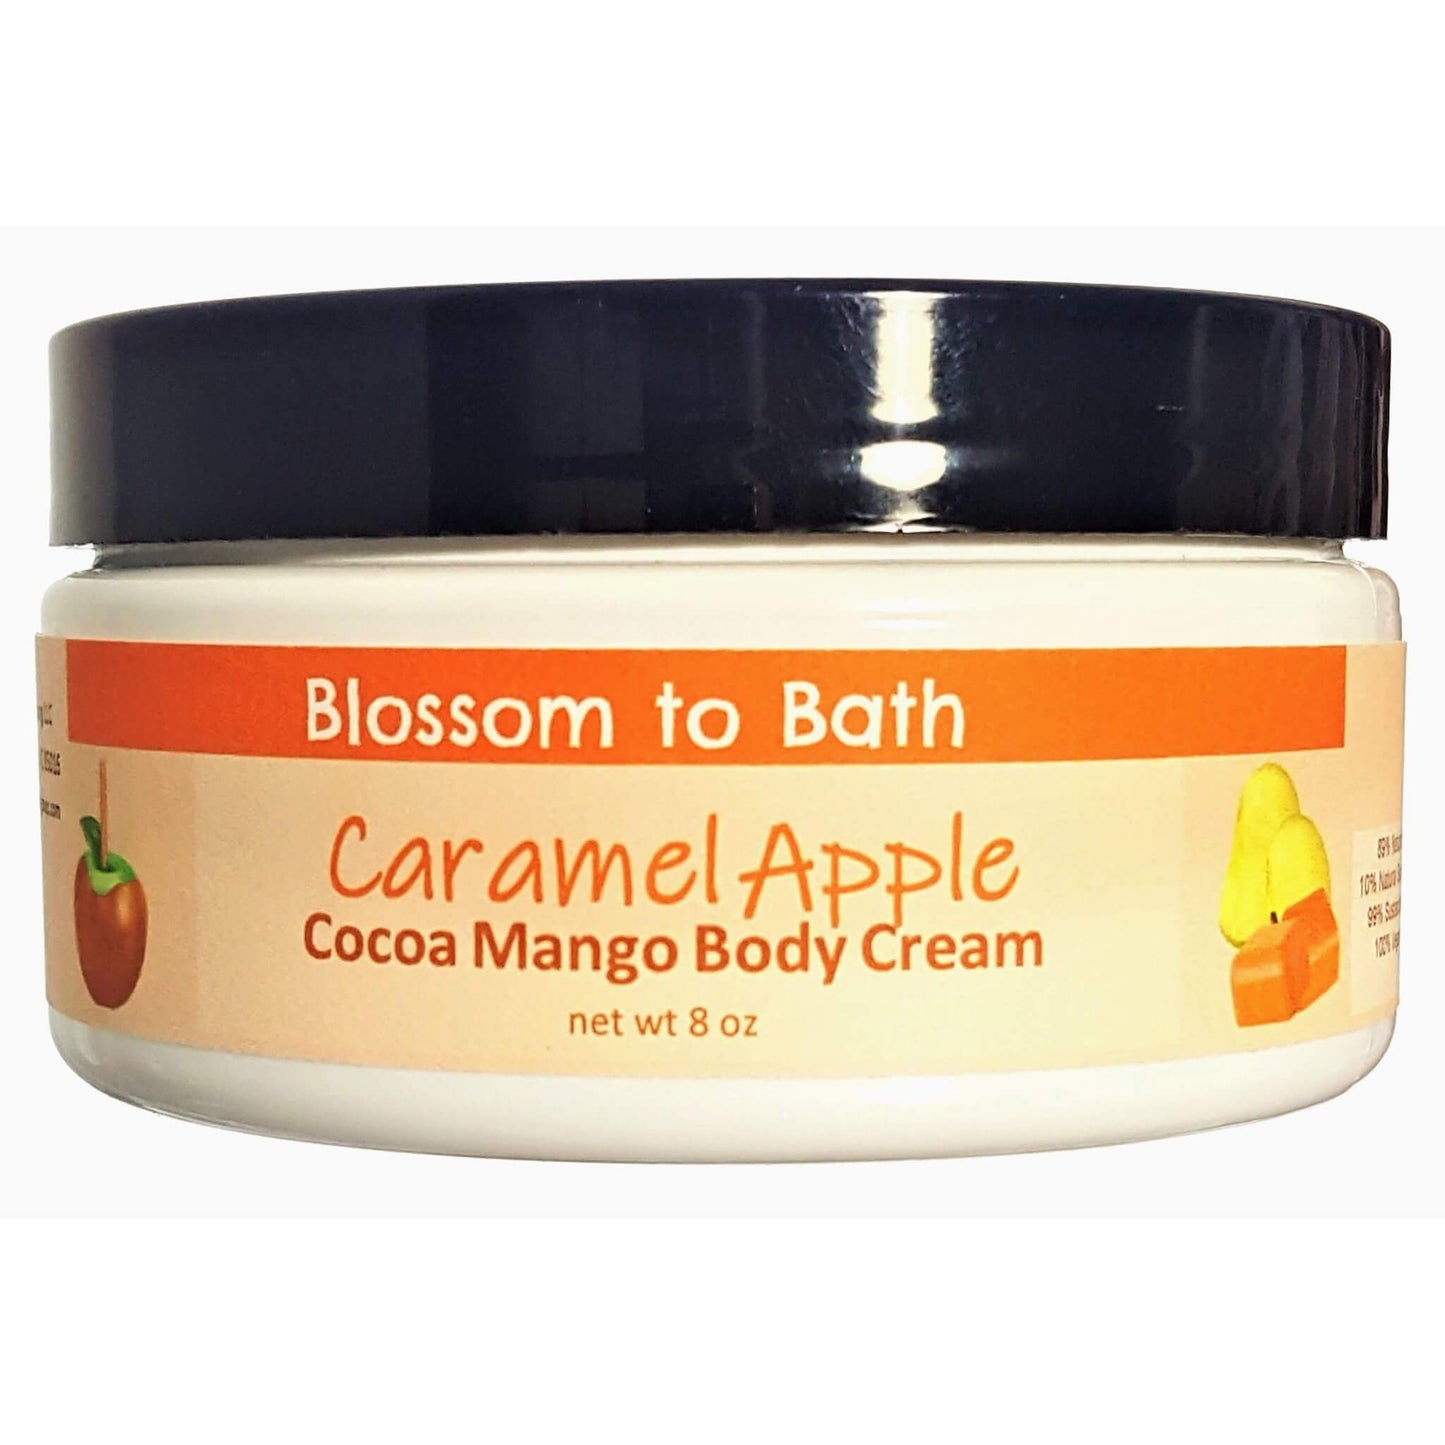 Buy Blossom to Bath Caramel Apple Cocoa Mango Body Cream from Flowersong Soap Studio.  Rich organic butters  soften and moisturize even the roughest skin all day  Bright fresh apple and warm rich caramel - a joyful combination of crisp fruit wrapped in decadent sweetness.